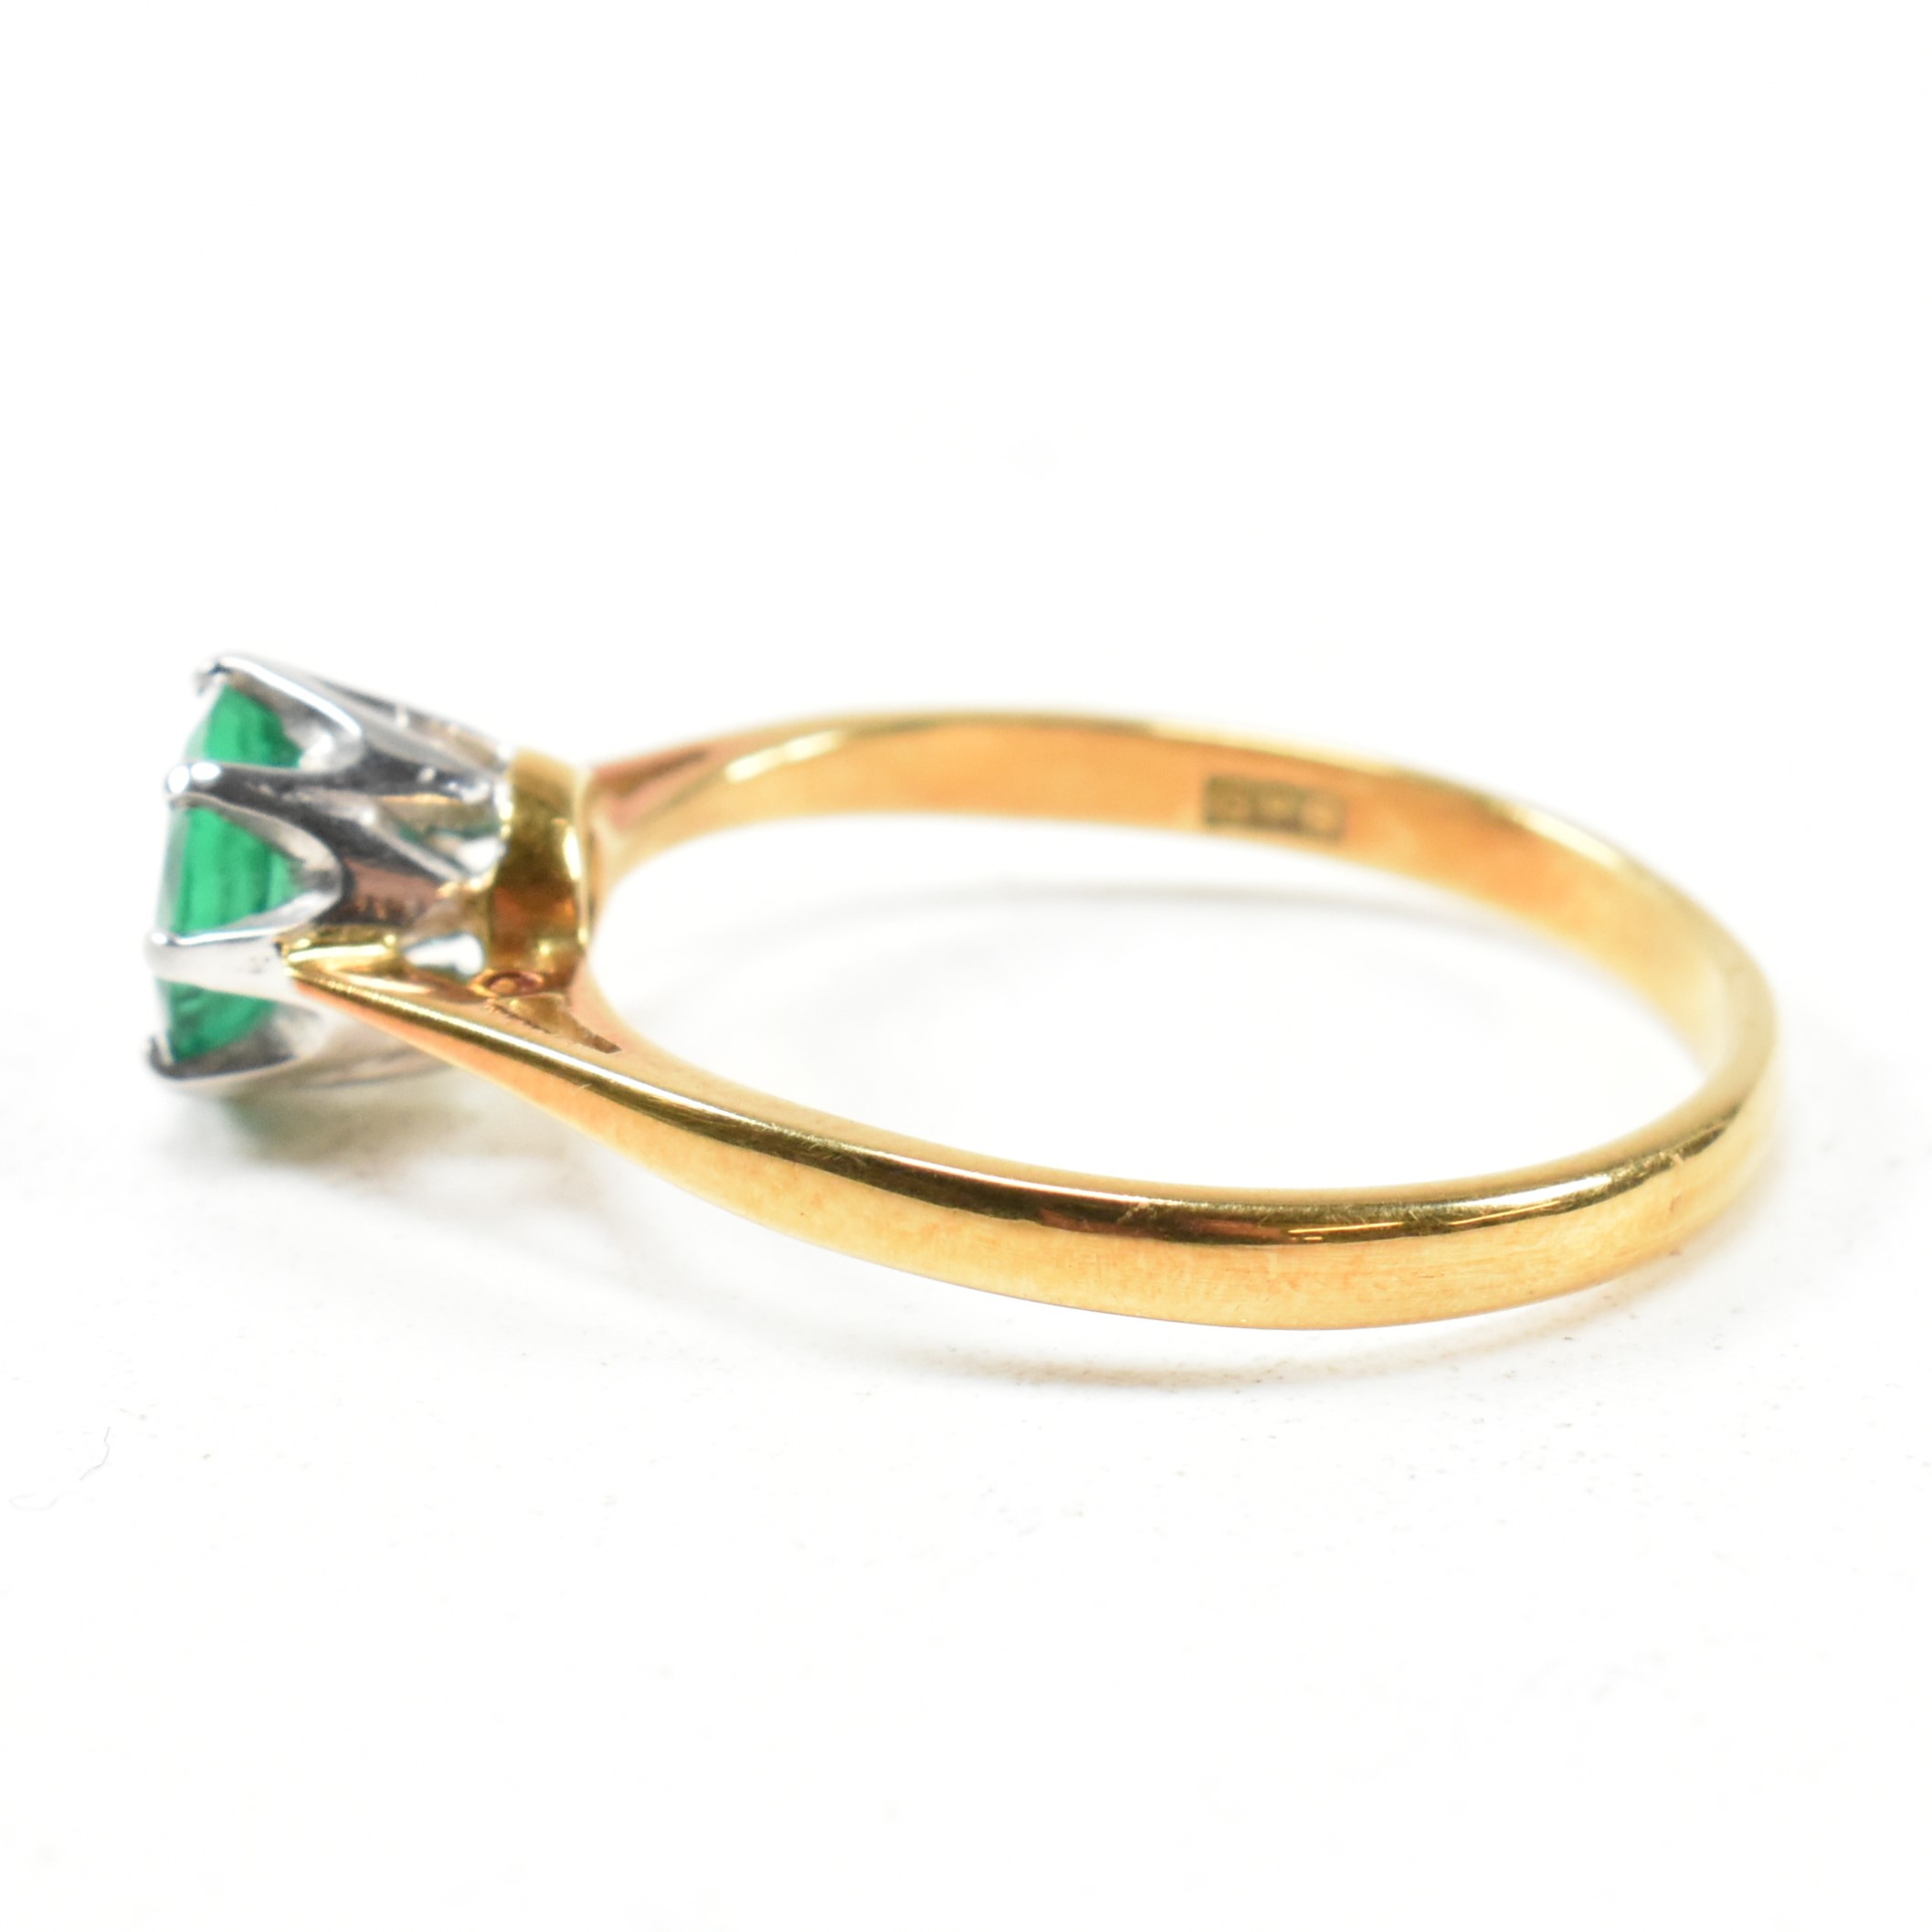 HALLMARKED 18CT GOLD & EMERALD SOLITAIRE RING - Image 7 of 10